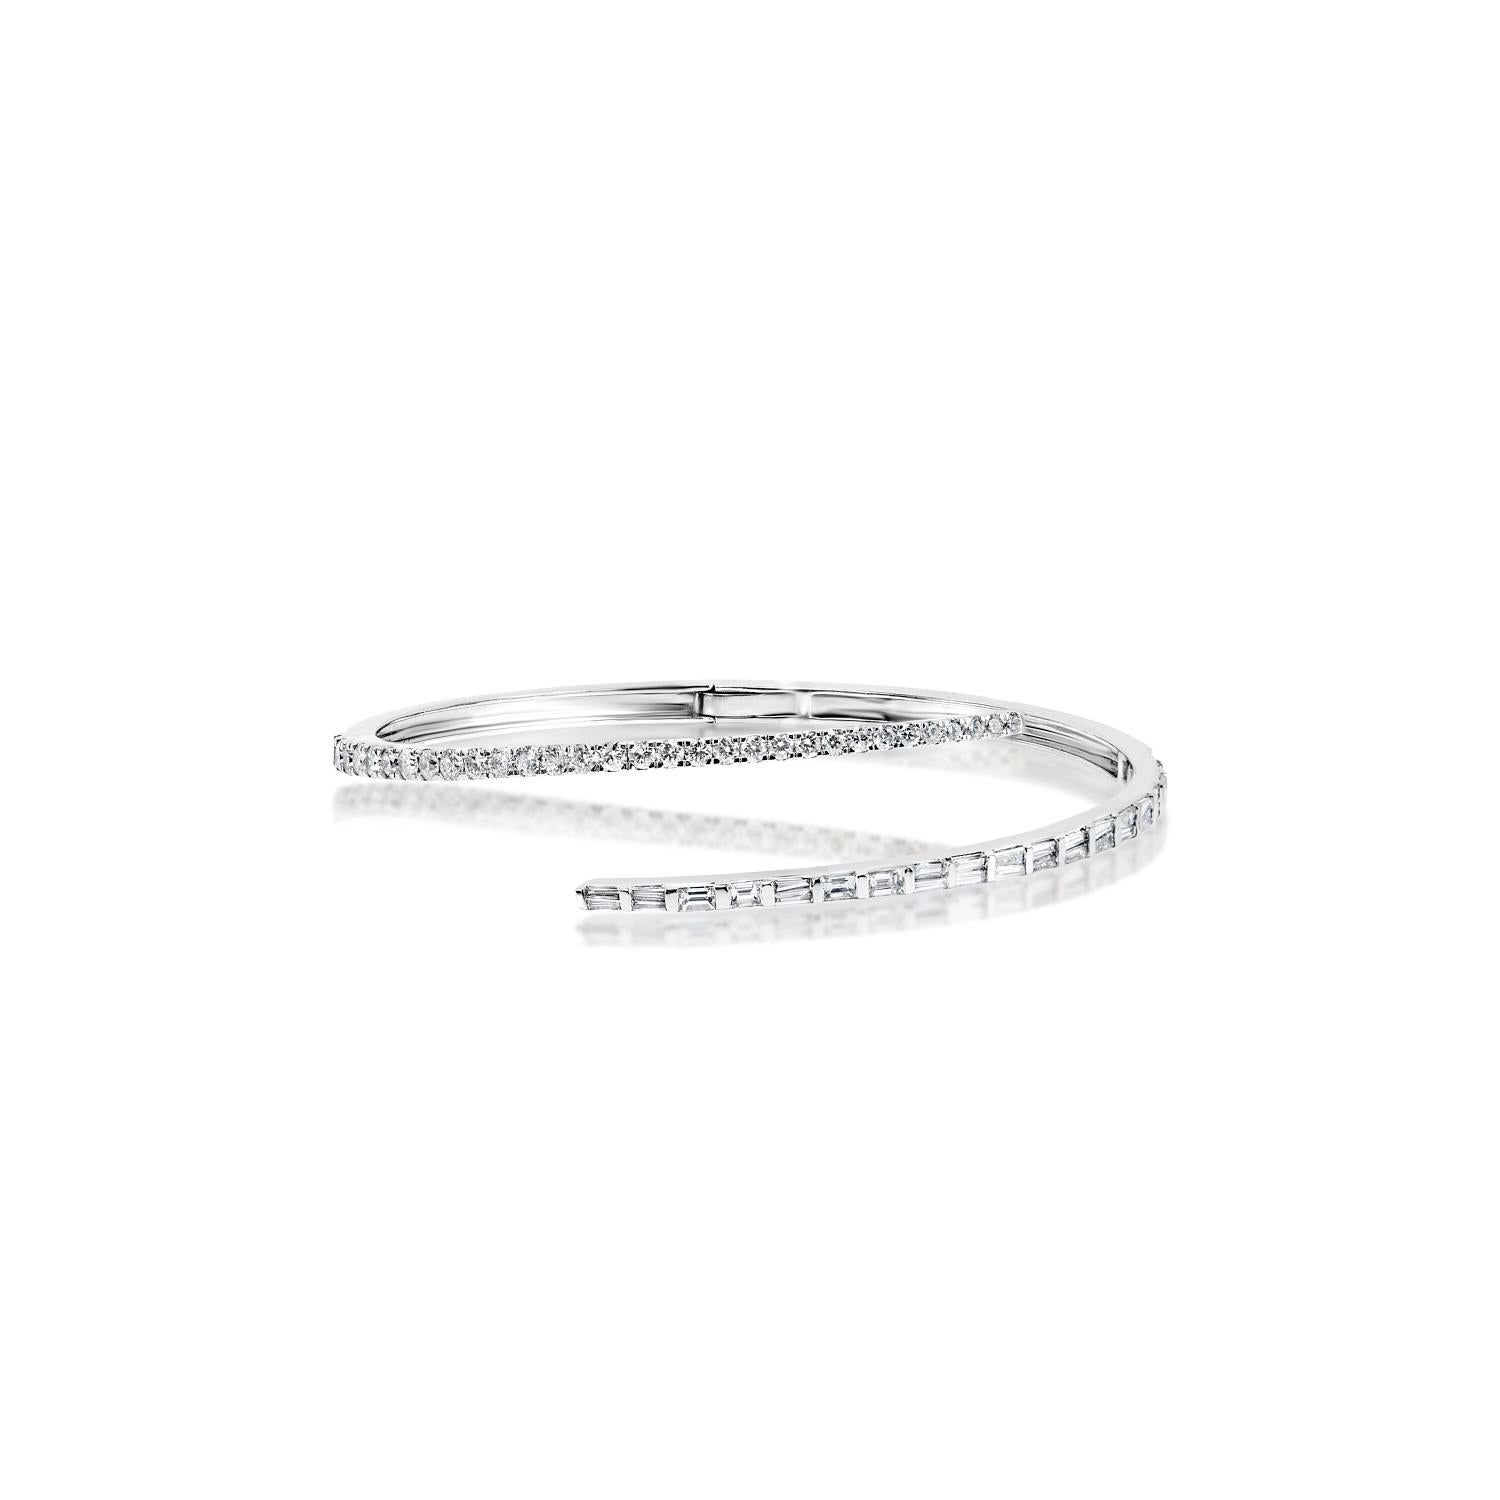 The MACK Men’s 3 Carat Diamond Bangle Bracelet features COMBINE MIX SHAPE DIAMONDS brilliants weighing a total of approximately 2.83 carats, set in 14K White Gold.


Style:
Diamonds
Diamond Size: 2.83 Carats
Diamond Shape: Combine Mix Shape
Metal: